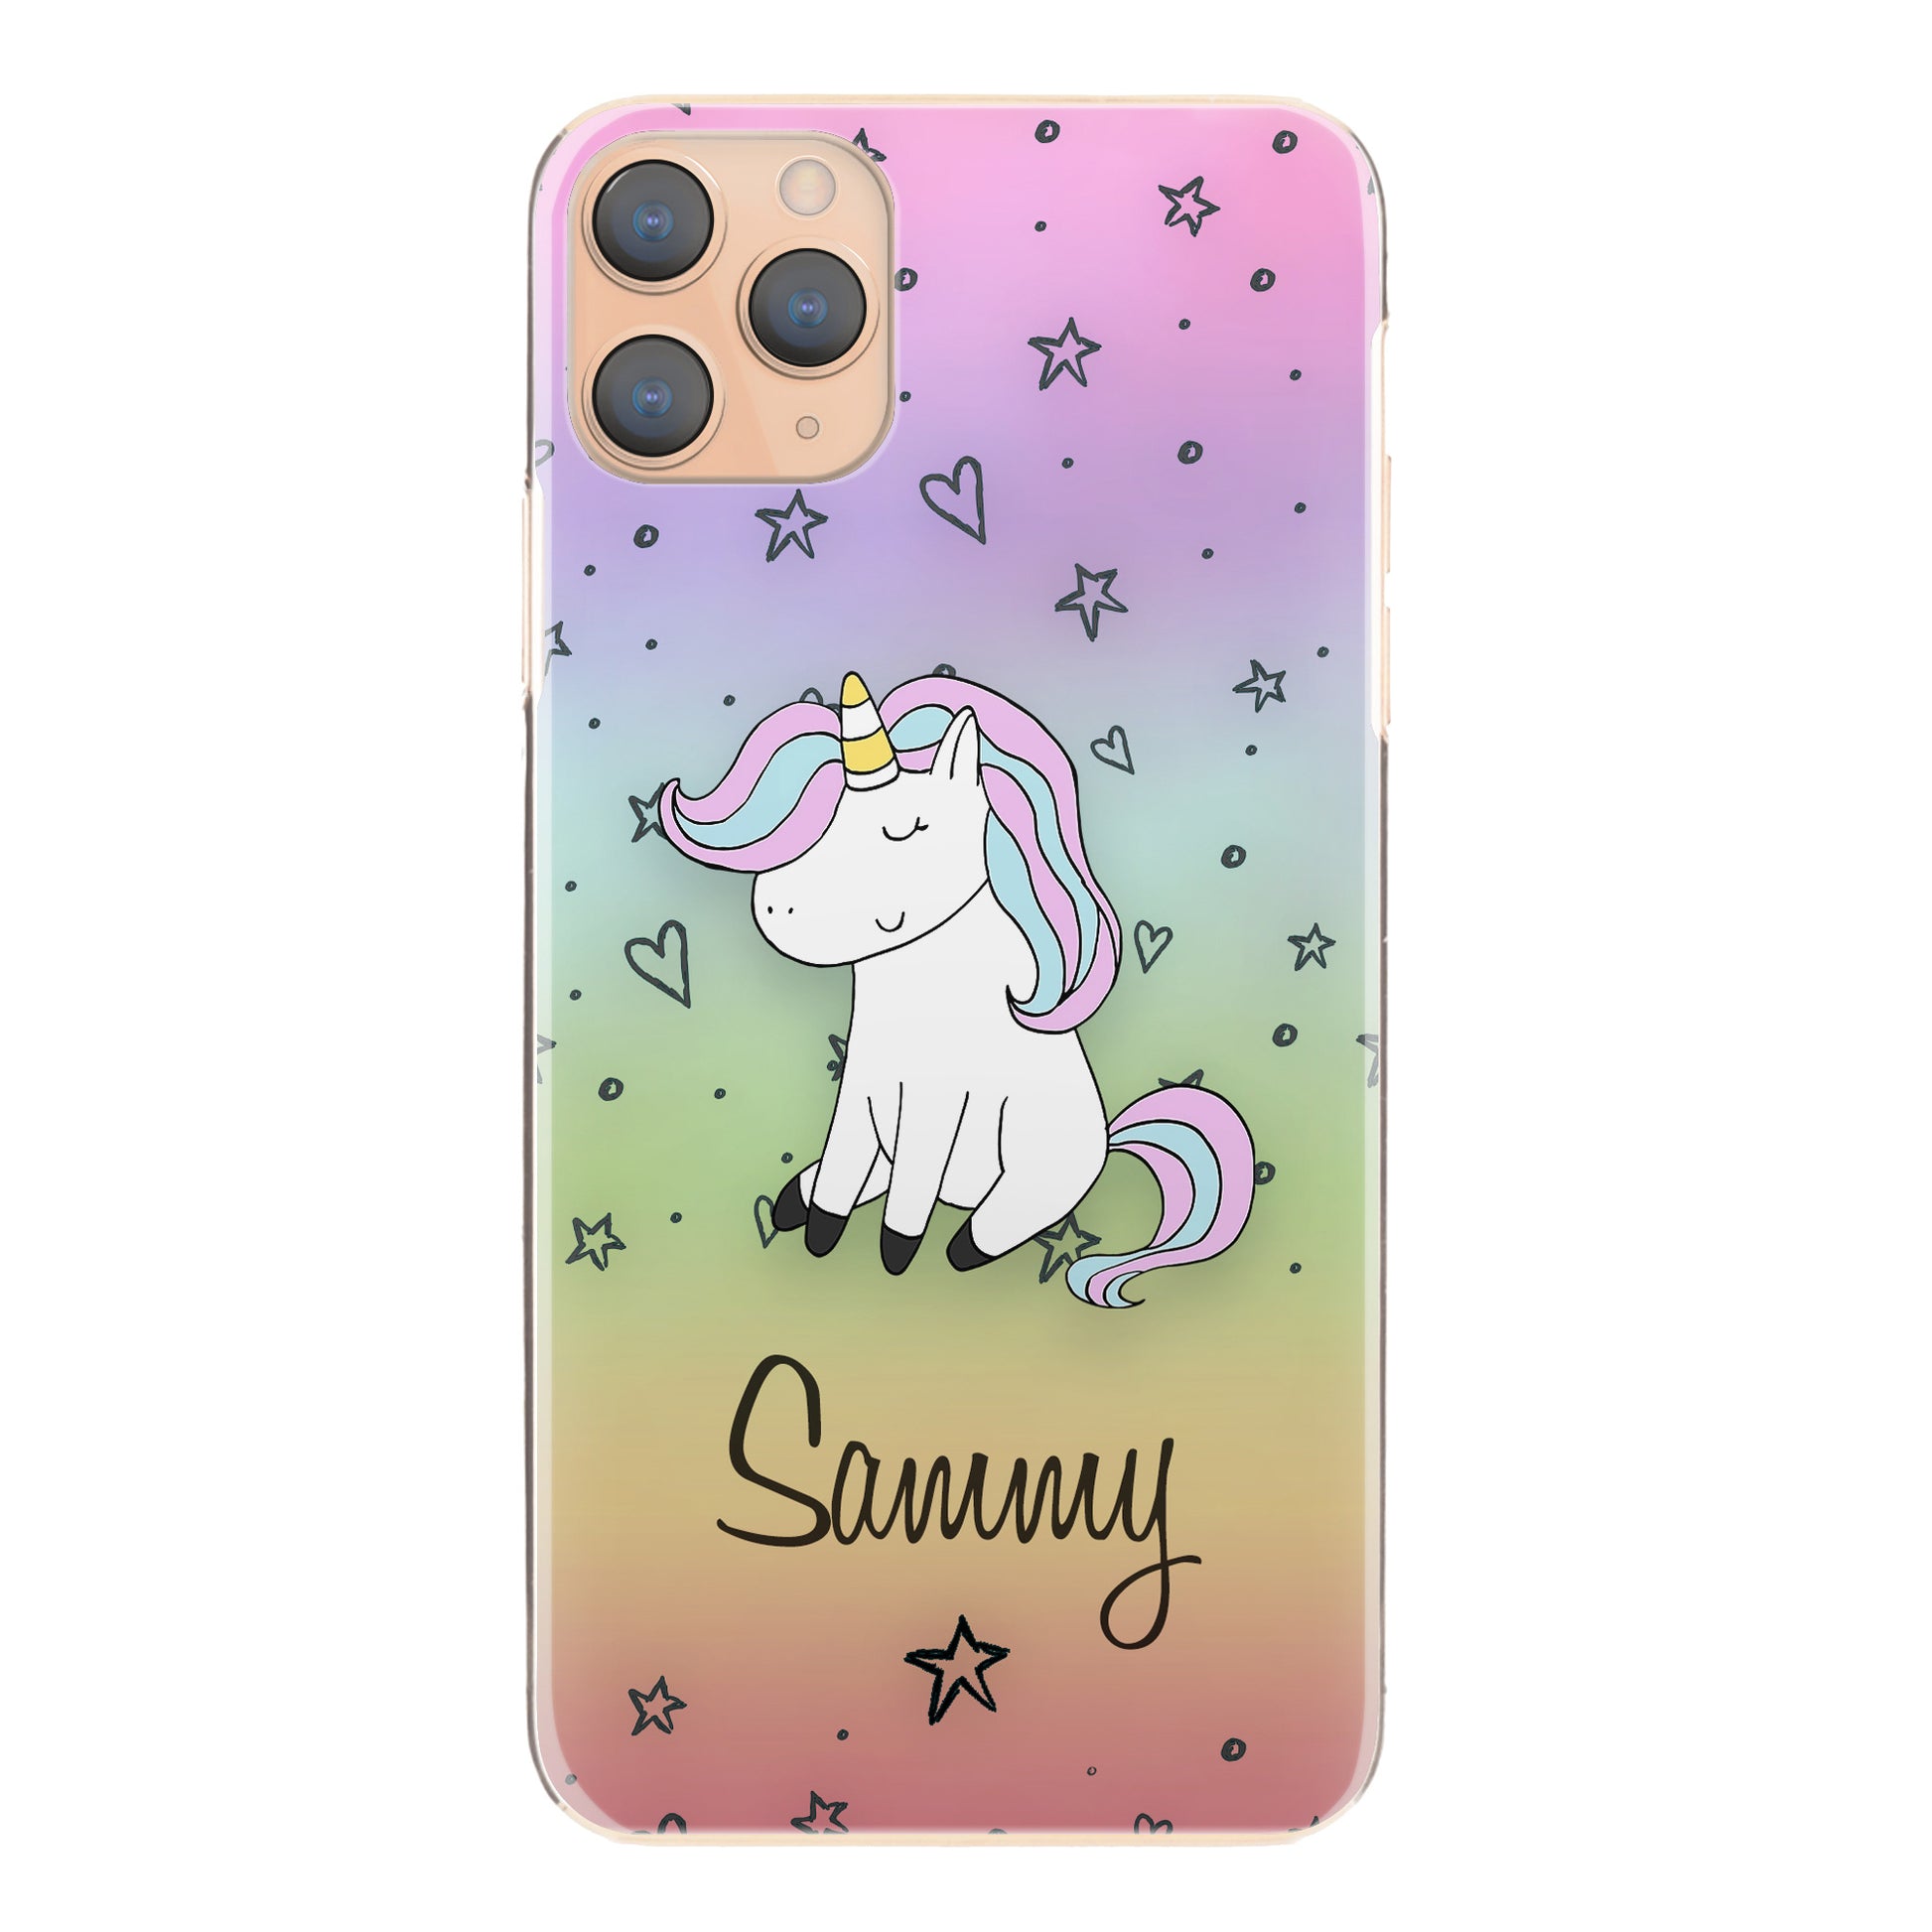 Personalised Samsung Galaxy Phone Hard Case with Pink and Blue Unicorn on Rainbow Stars and Hearts